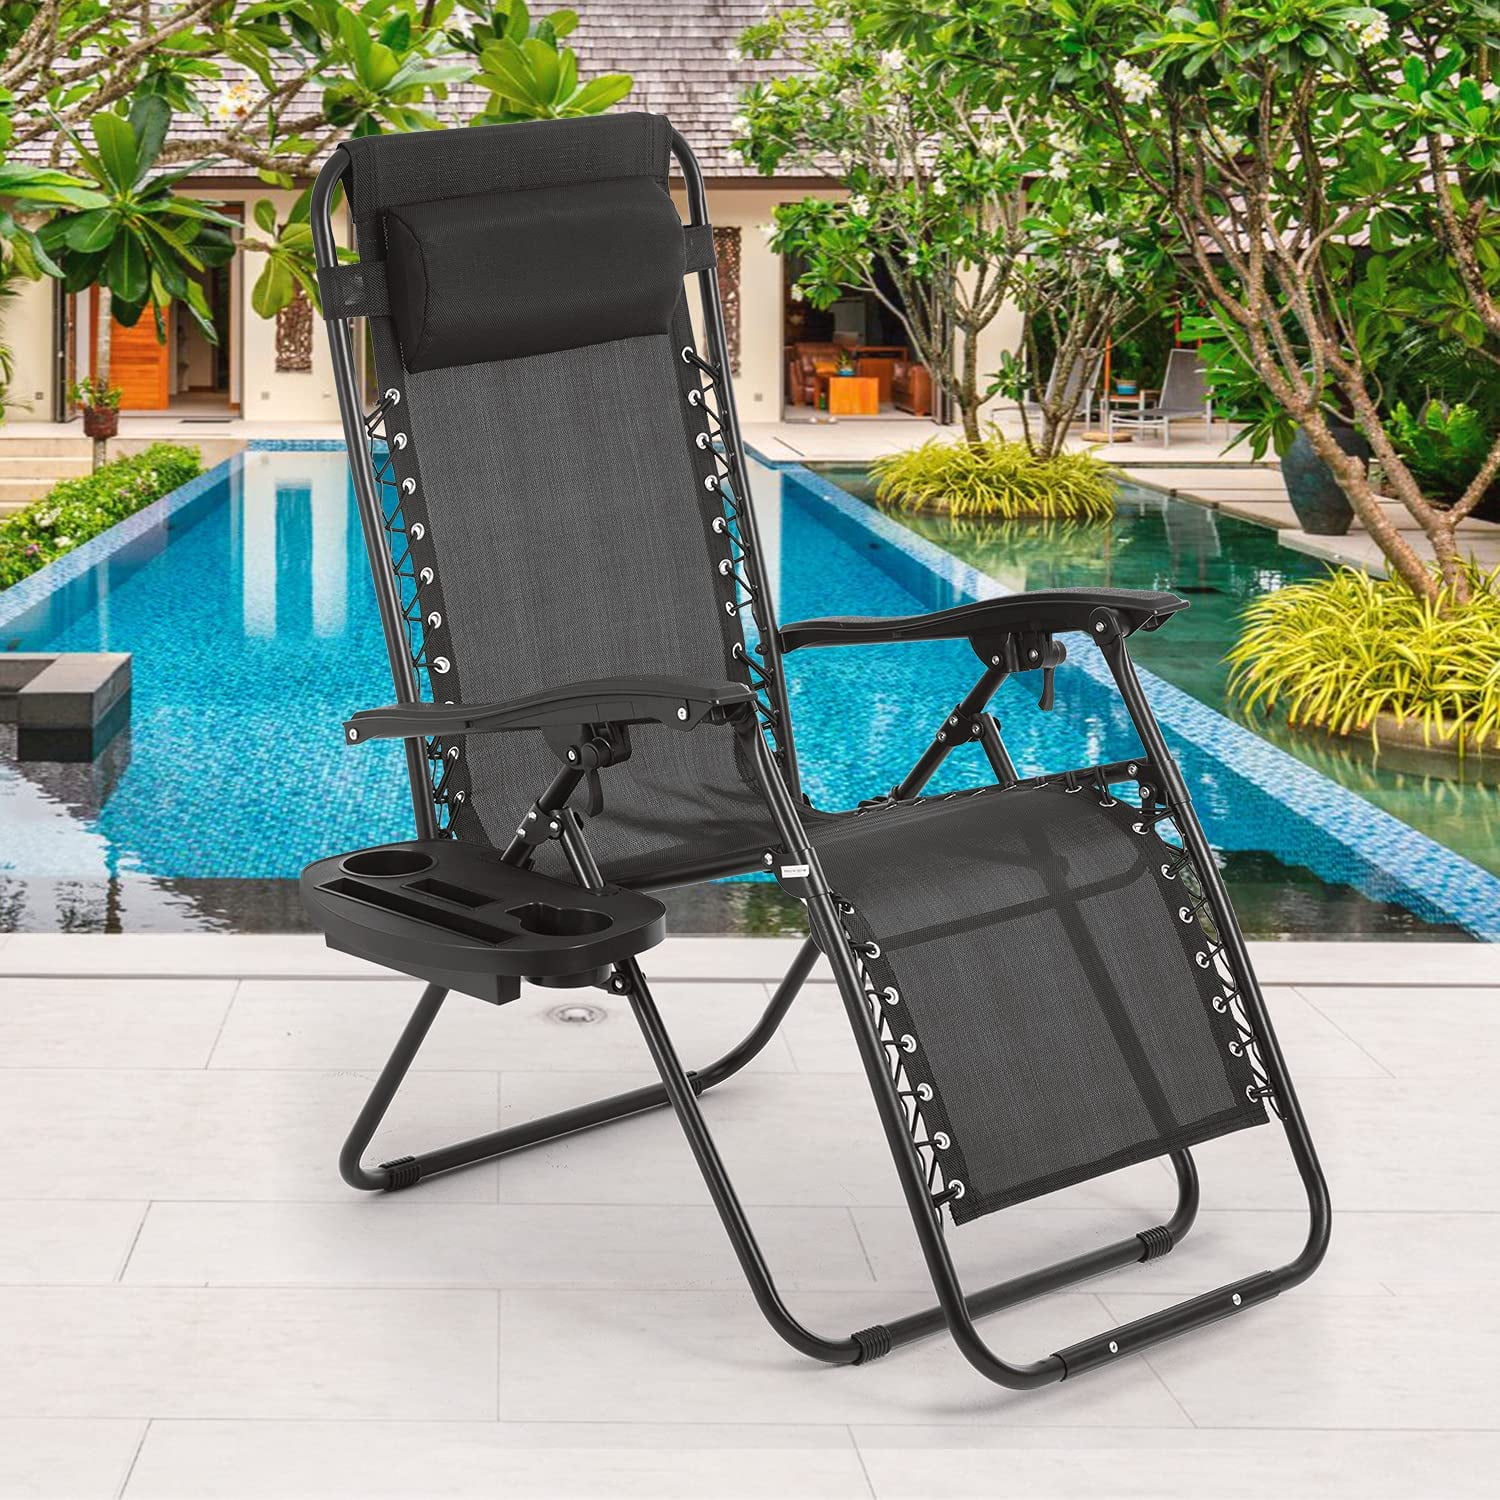 Sun Lounger Zero Gravity Chairs Folding Reclining Chairs for Garden Outdoor Beach Pool Camping Patio Set of 1